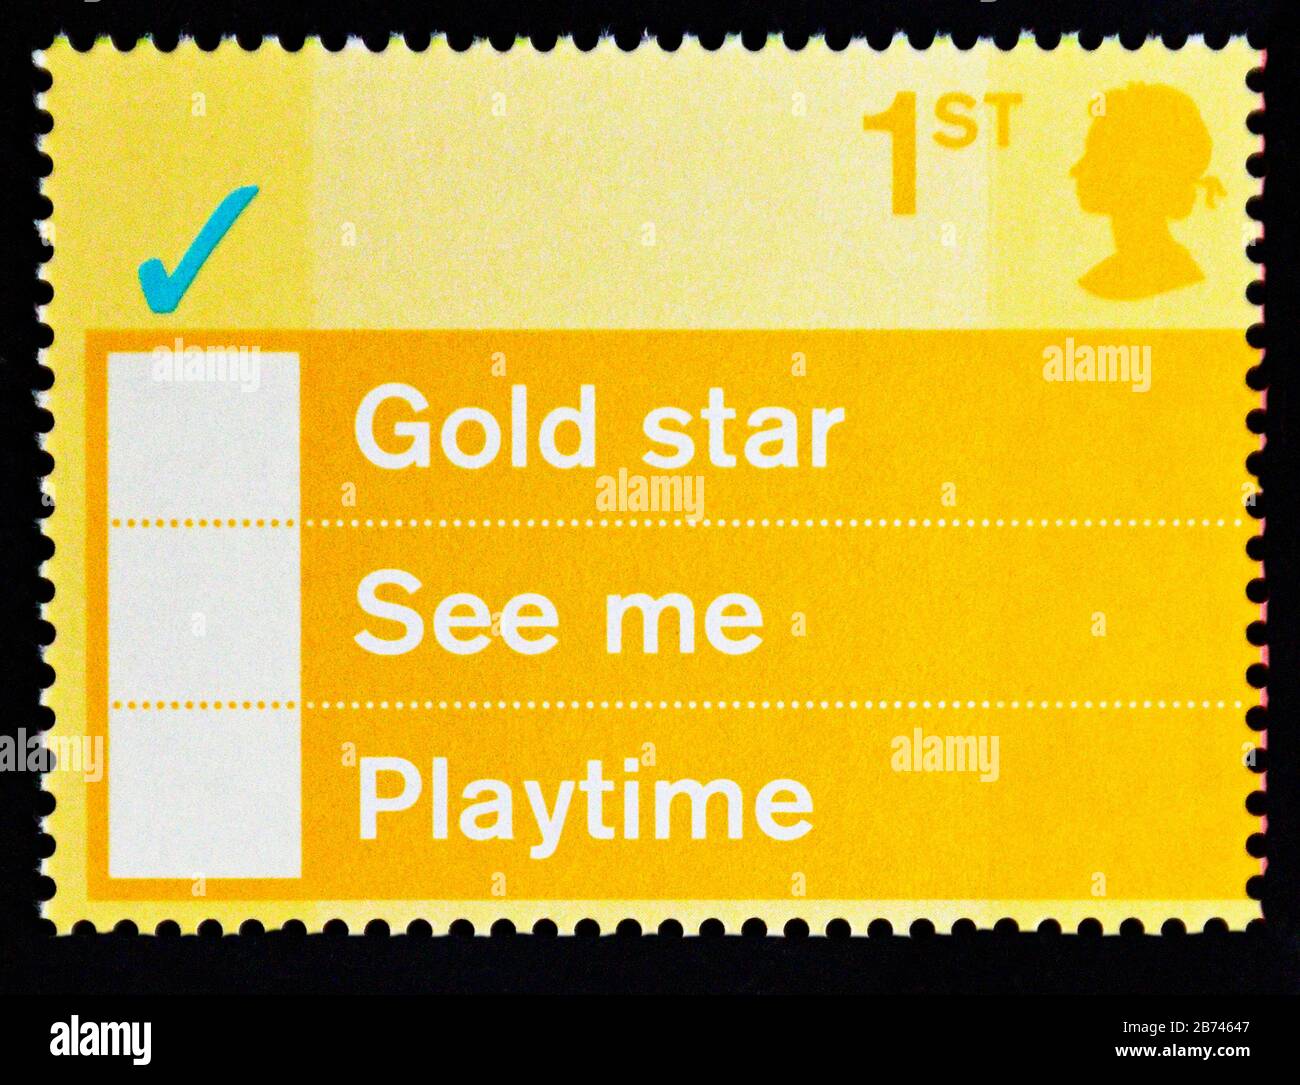 Postage stamp. Great Britain. Queen Elizabeth II. 'Occasions' Greetings Stamps. 'Gold star', 'See me', 'Playtime'. 1st. 2003. Stock Photo